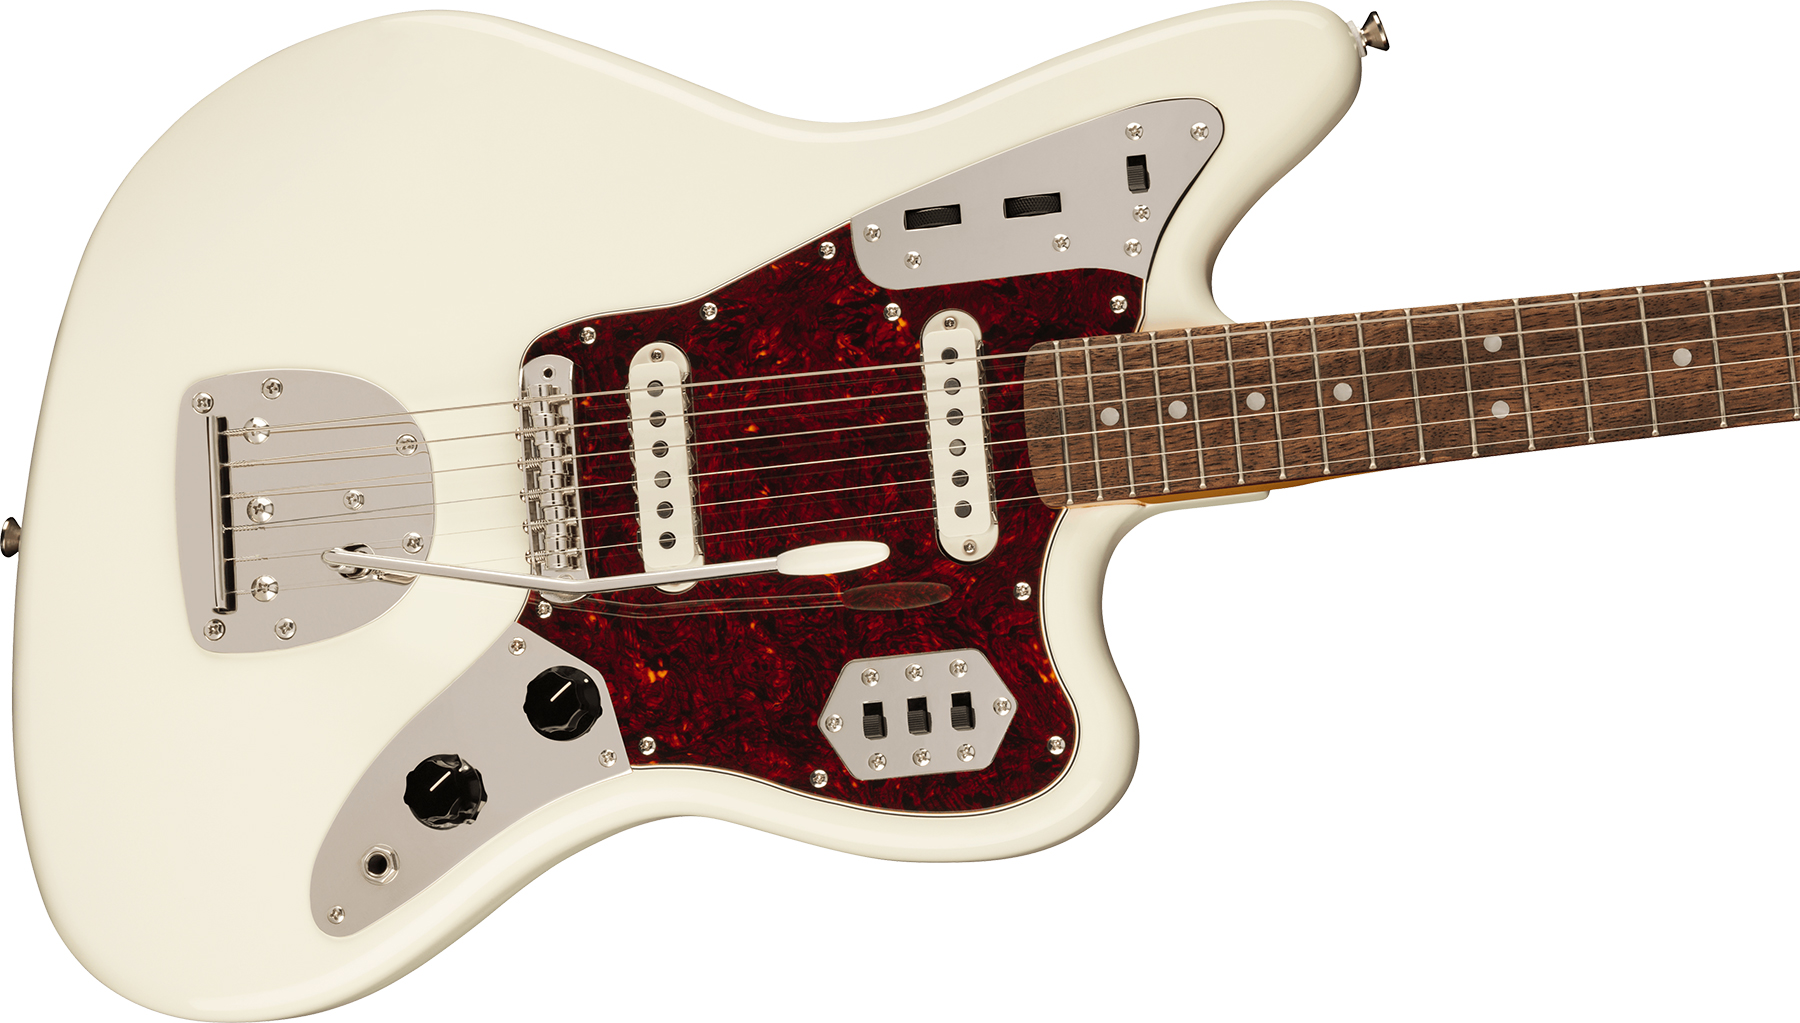 Squier Jaguar Classic Vibe 60s Fsr Ltd Lau - Olympic White With Matching Headstock - Guitarra electrica retro rock - Variation 2